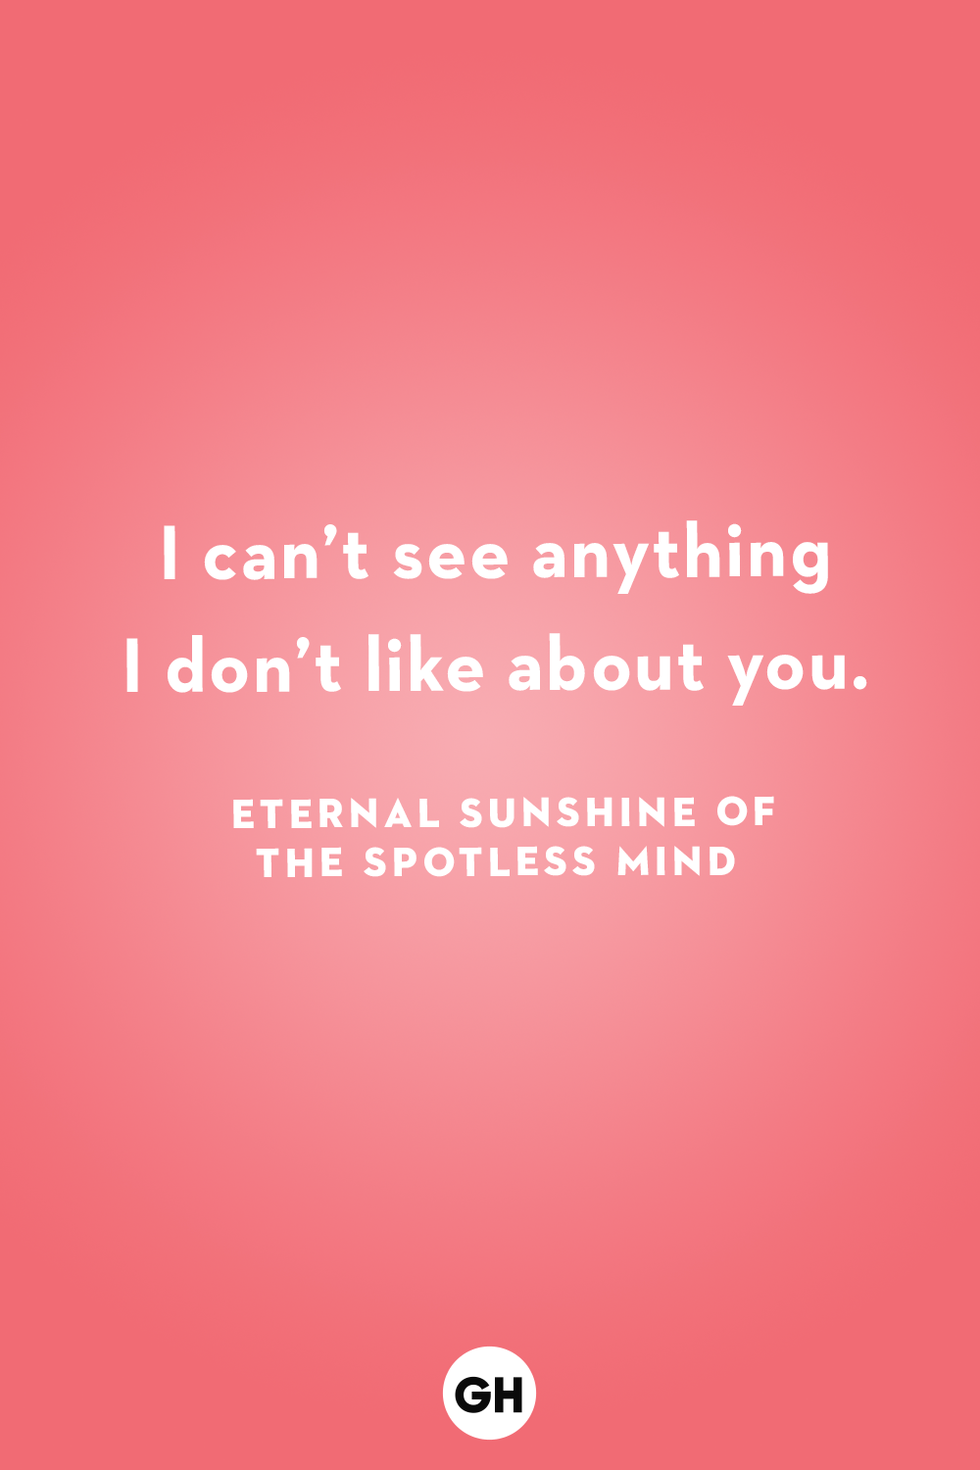 15 Prove Your Love Quotes To Show Him Exactly How You Feel